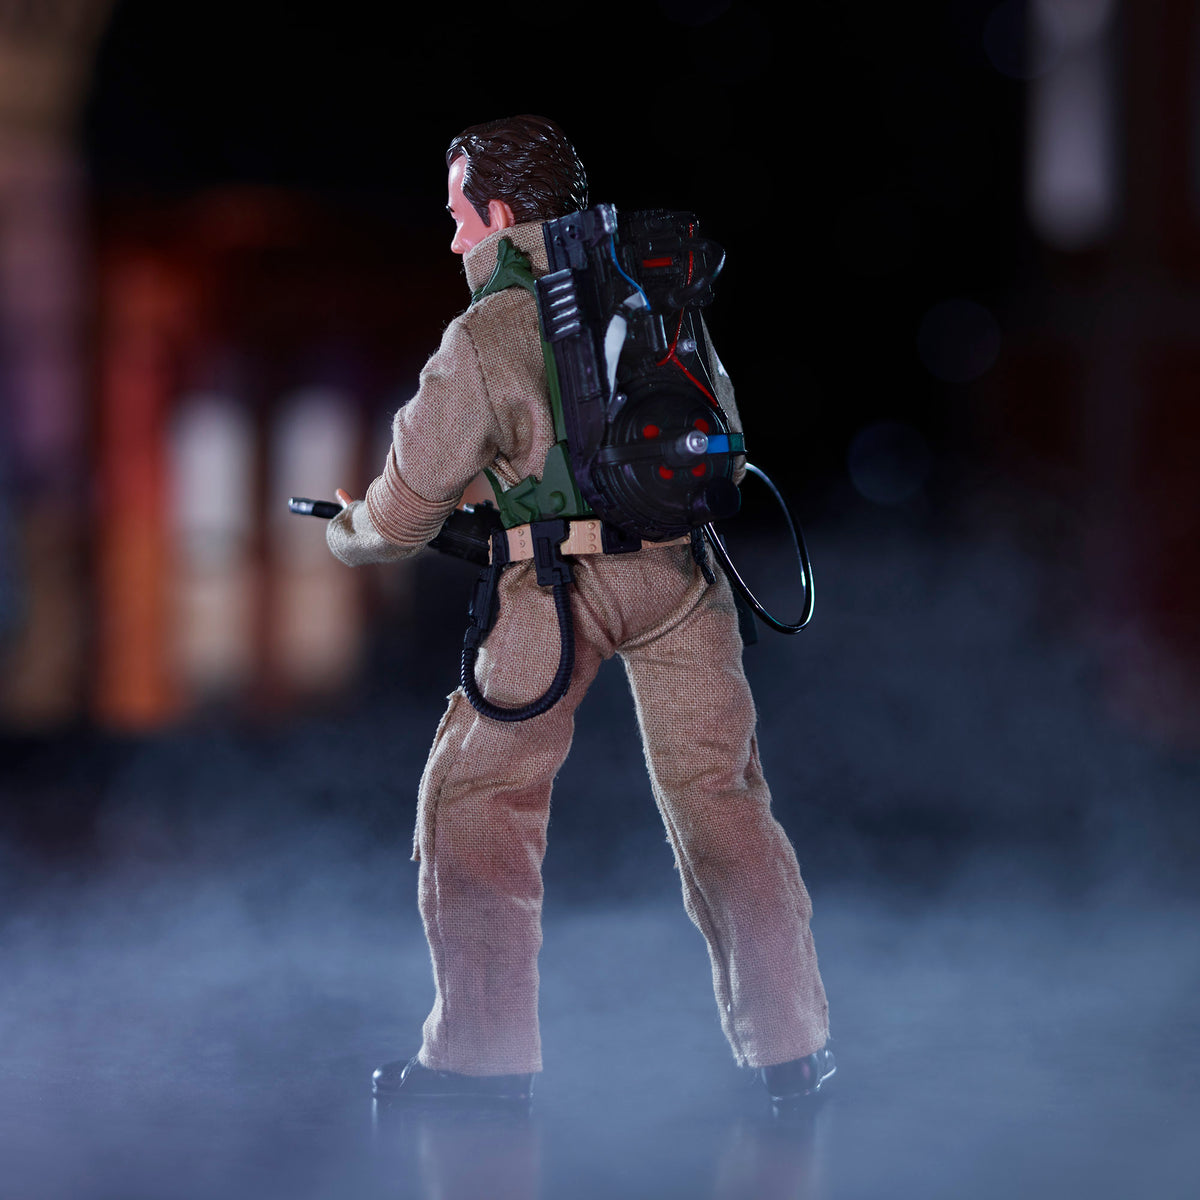 Ghostbusters X Mego action figure four-pack is on clearance for